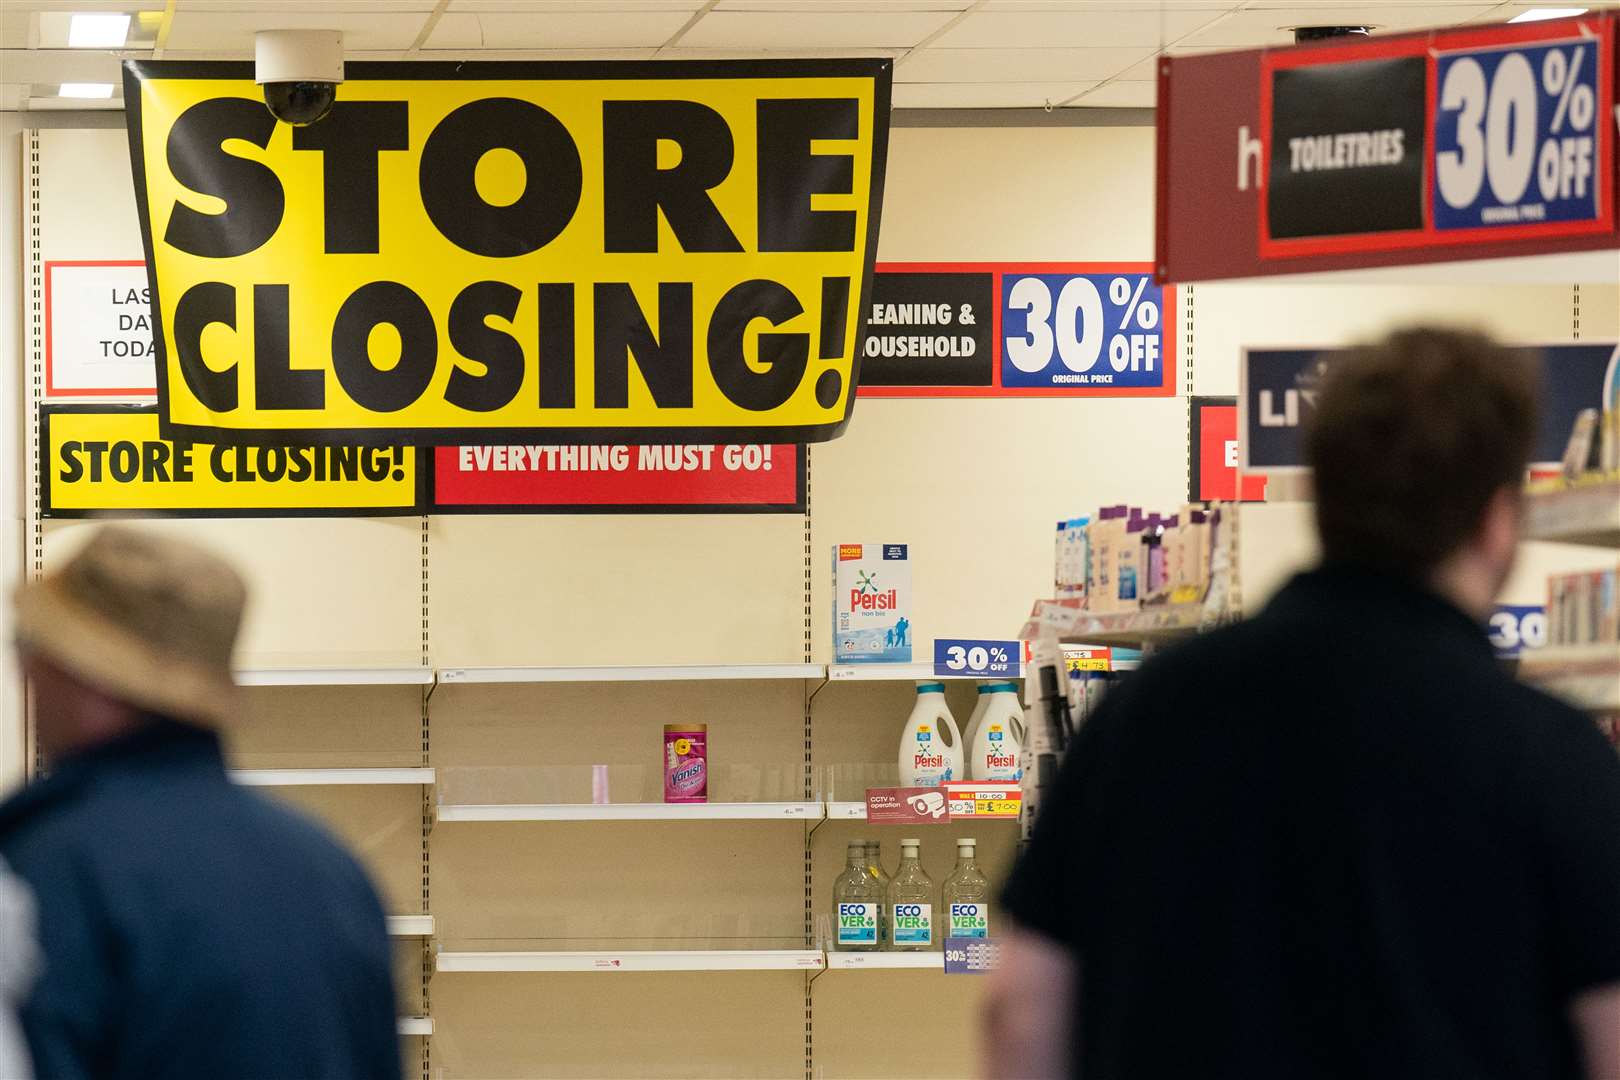 Wilko stores were forced to close after the chain collapsed (Joe Giddens/PA)